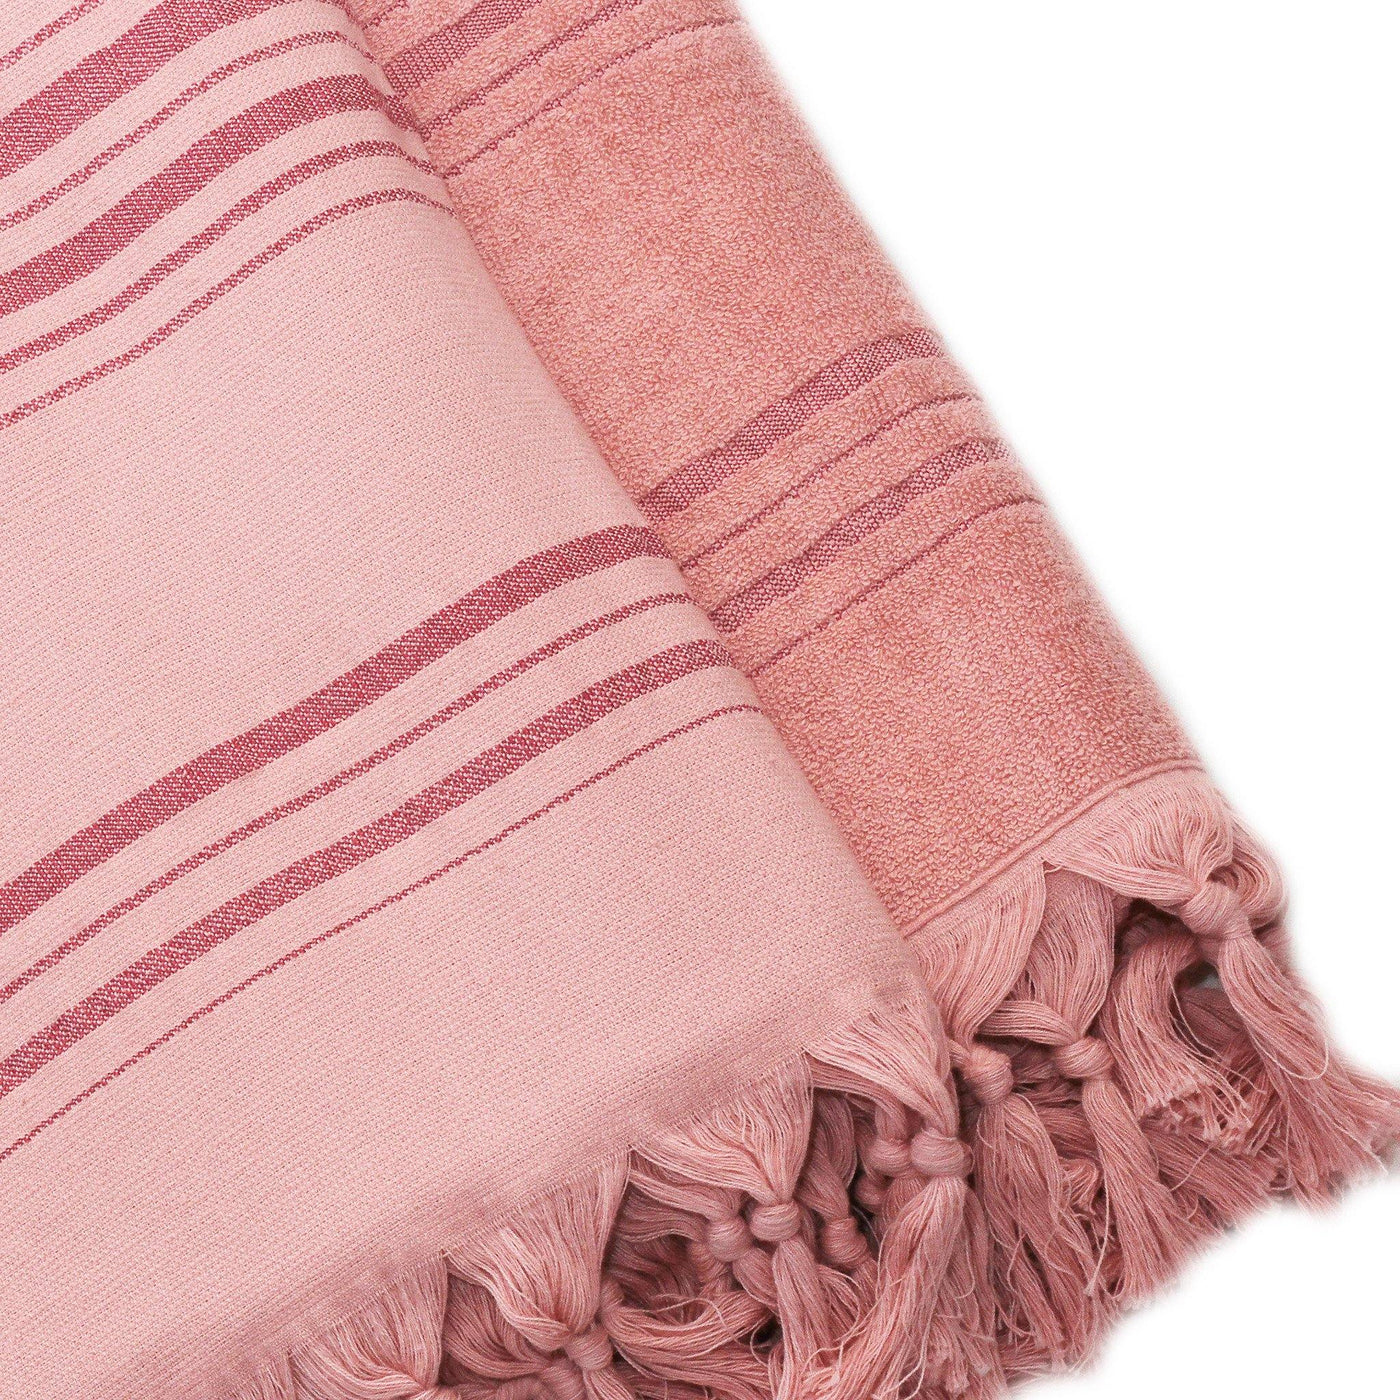 Double Sided Towel - madeathand.nl